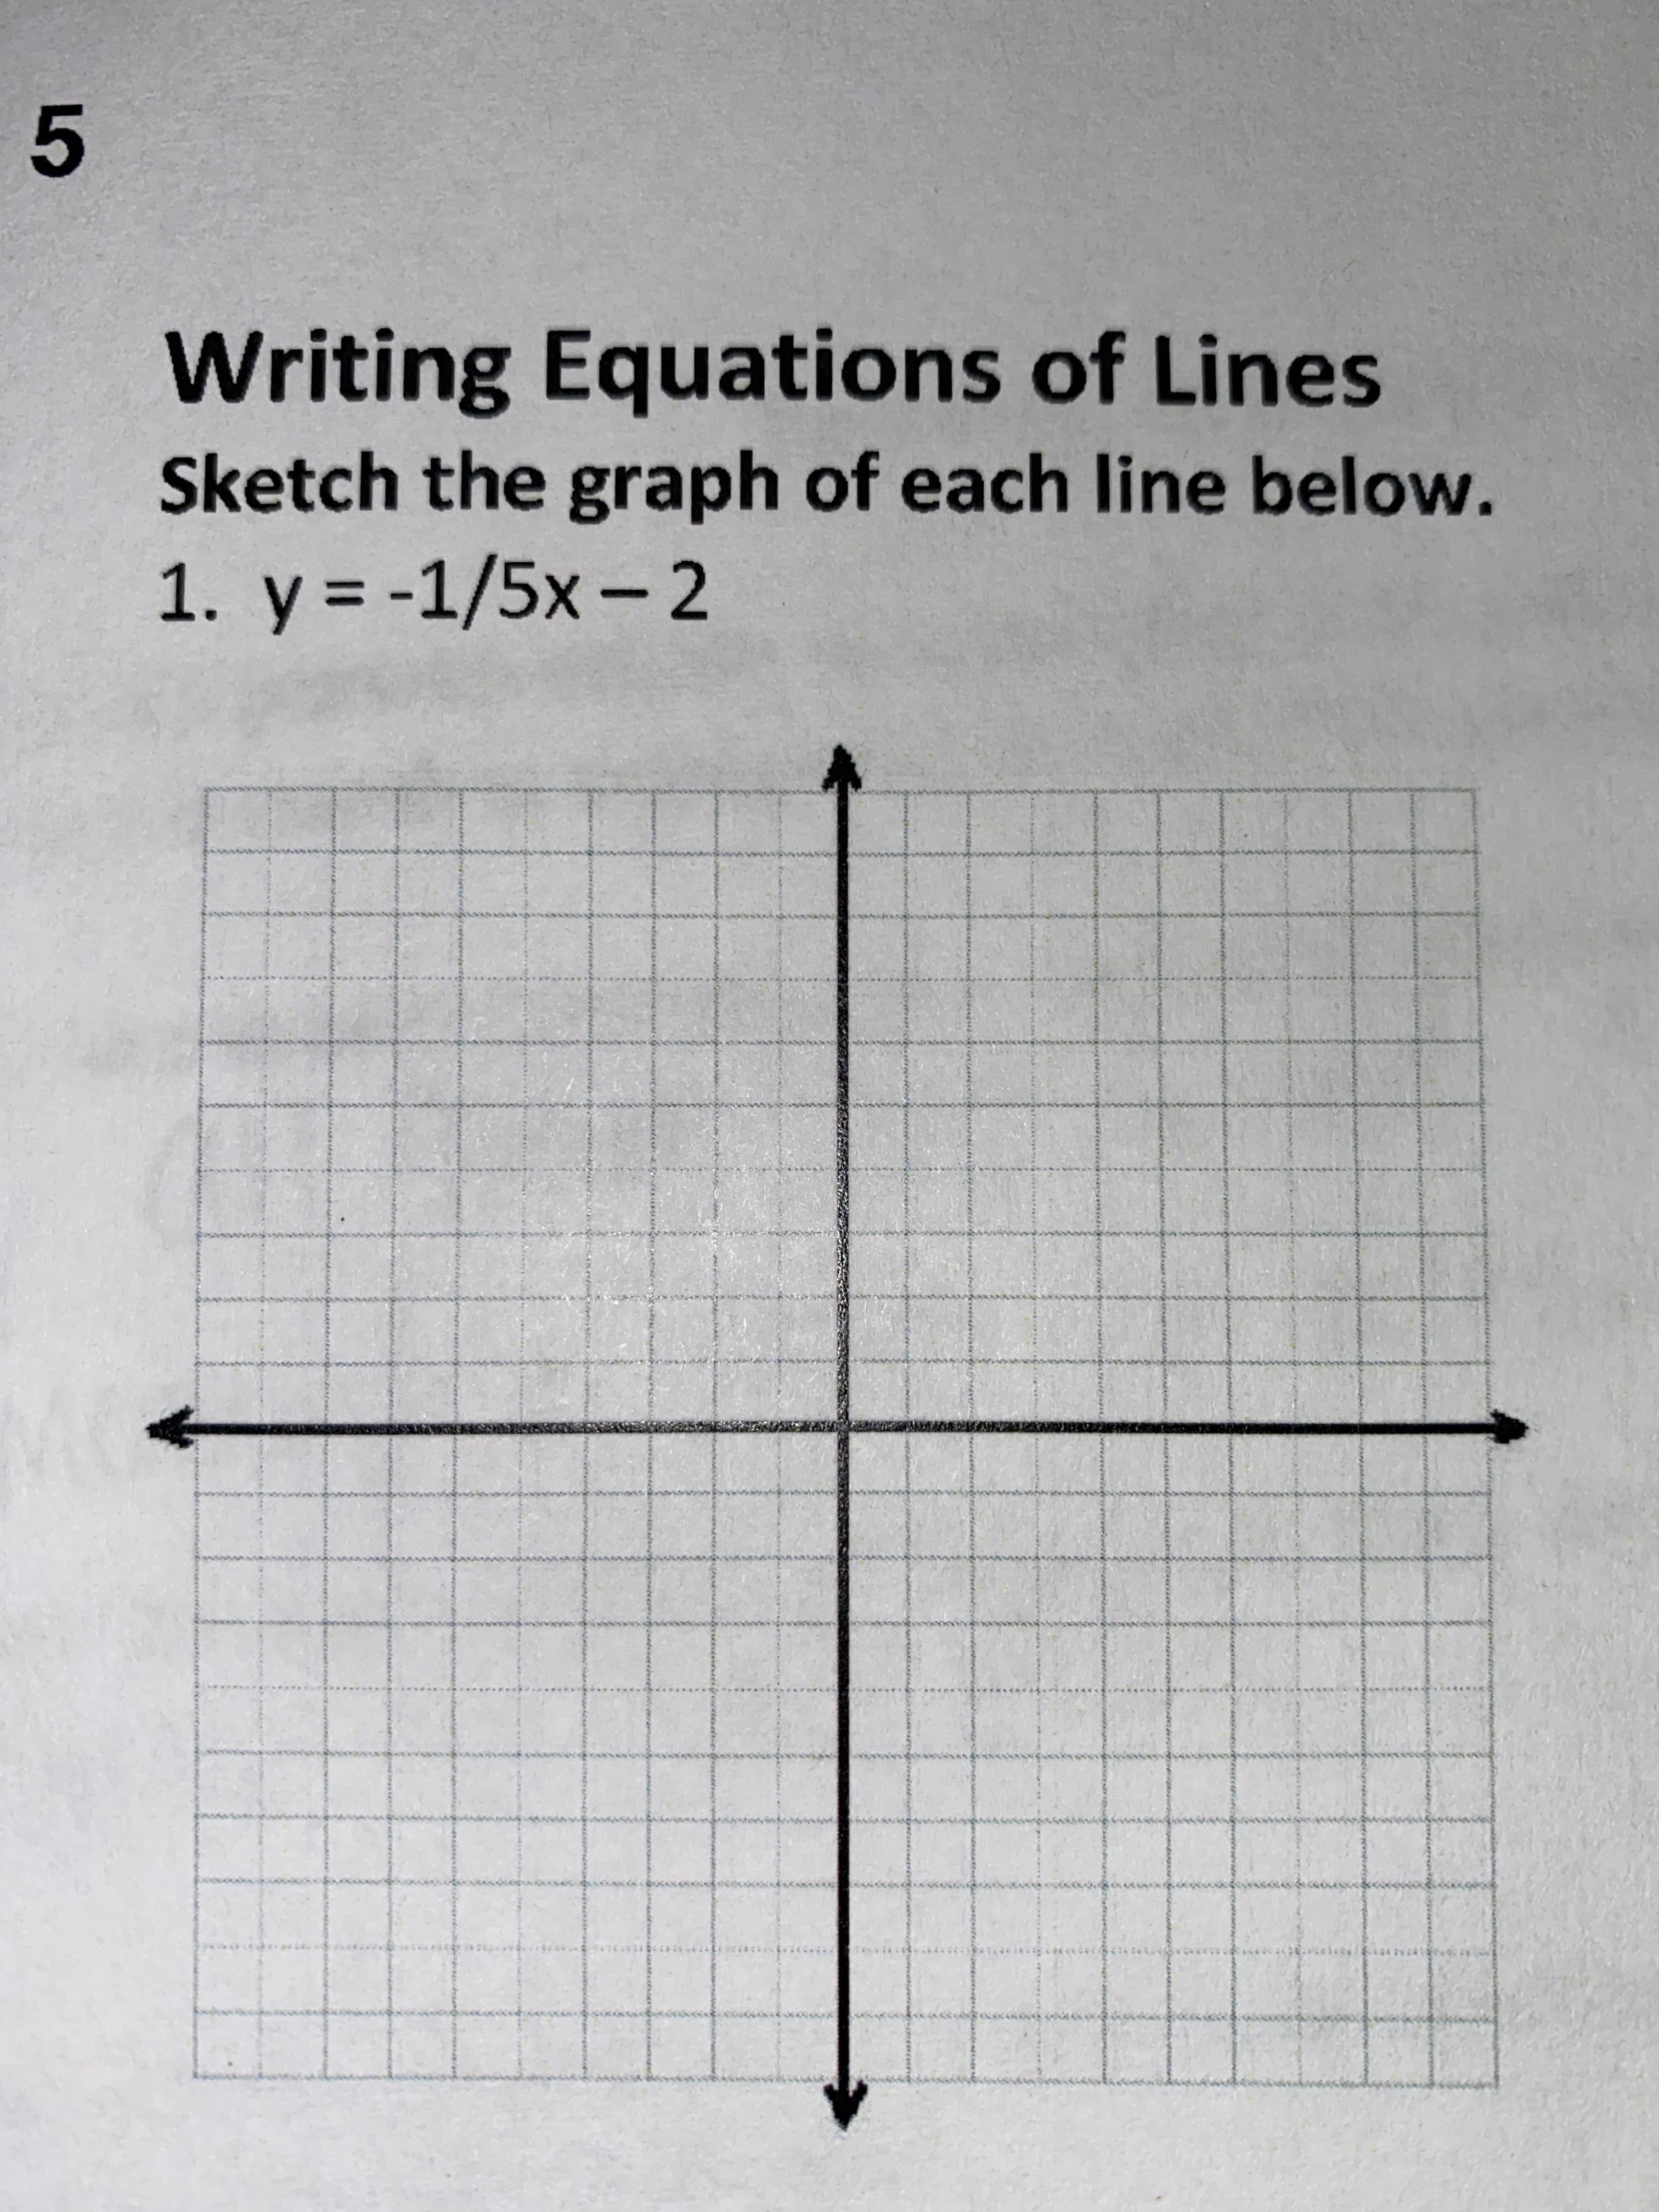 Writing Equations of Lines
Sketch the graph of each line below.
1. y = -1/5x – 2
